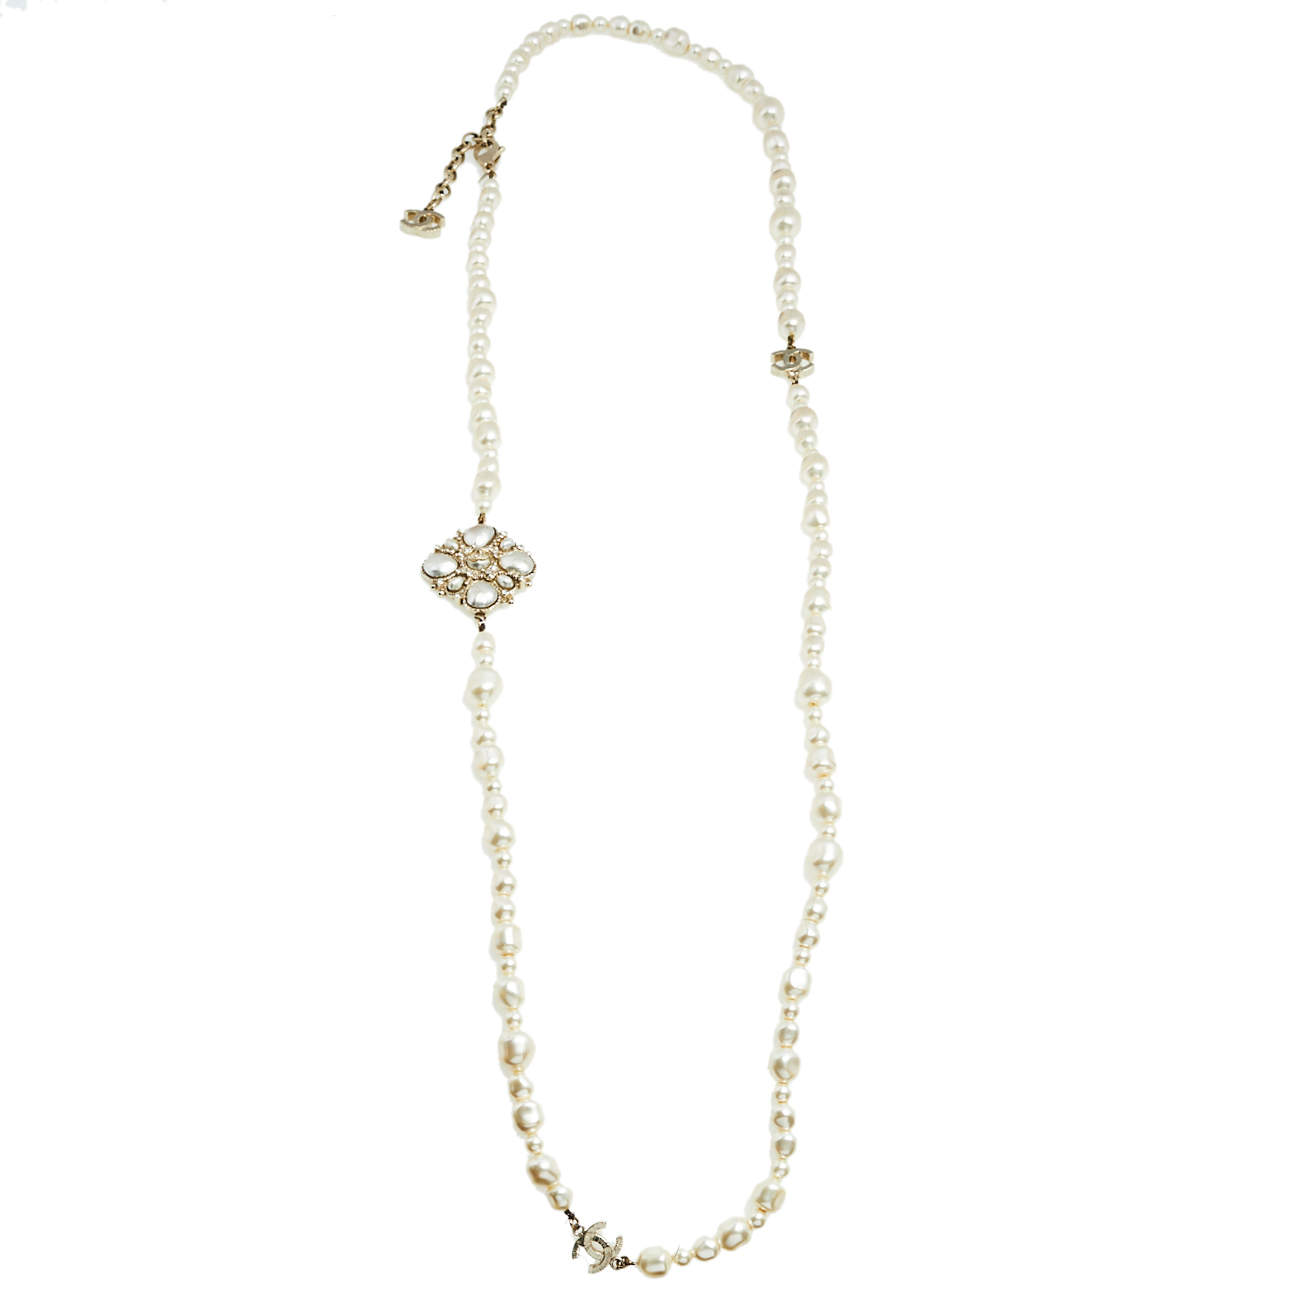 Chanel Crystal Embellished Charm Pearl Long Necklace